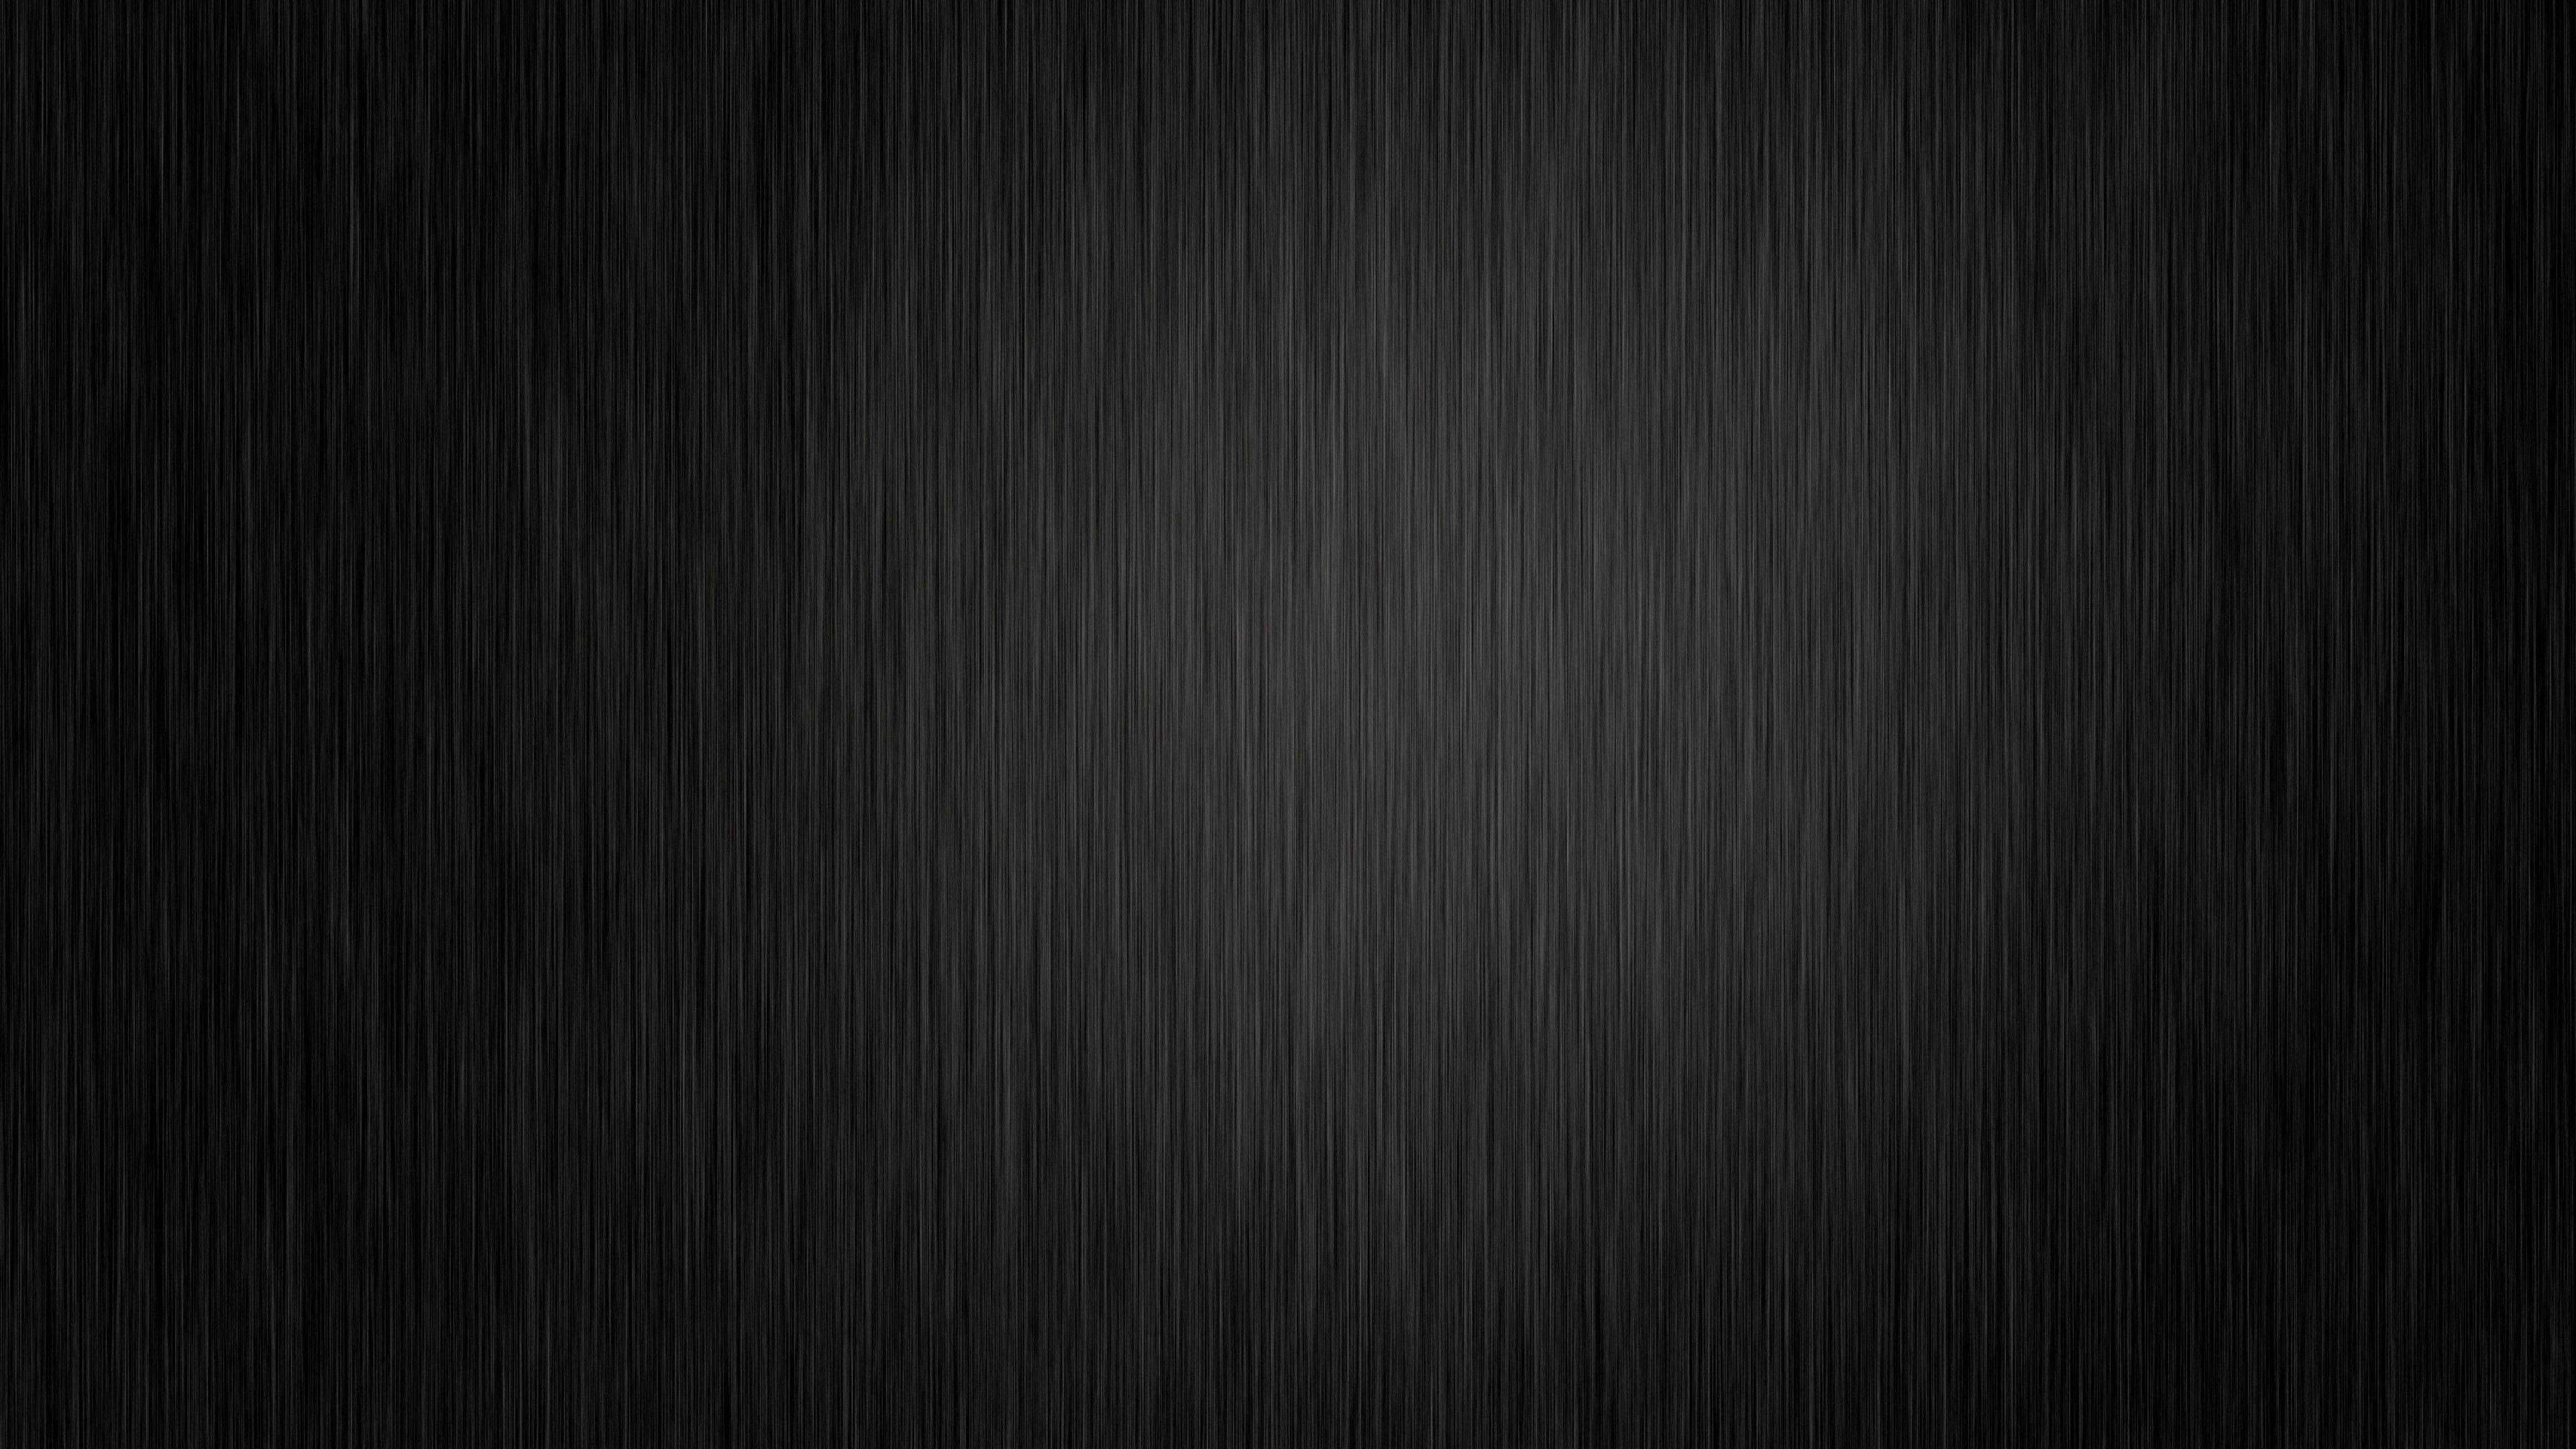 77 Matte Black Wallpaper Stock Photos HighRes Pictures and Images   Getty Images